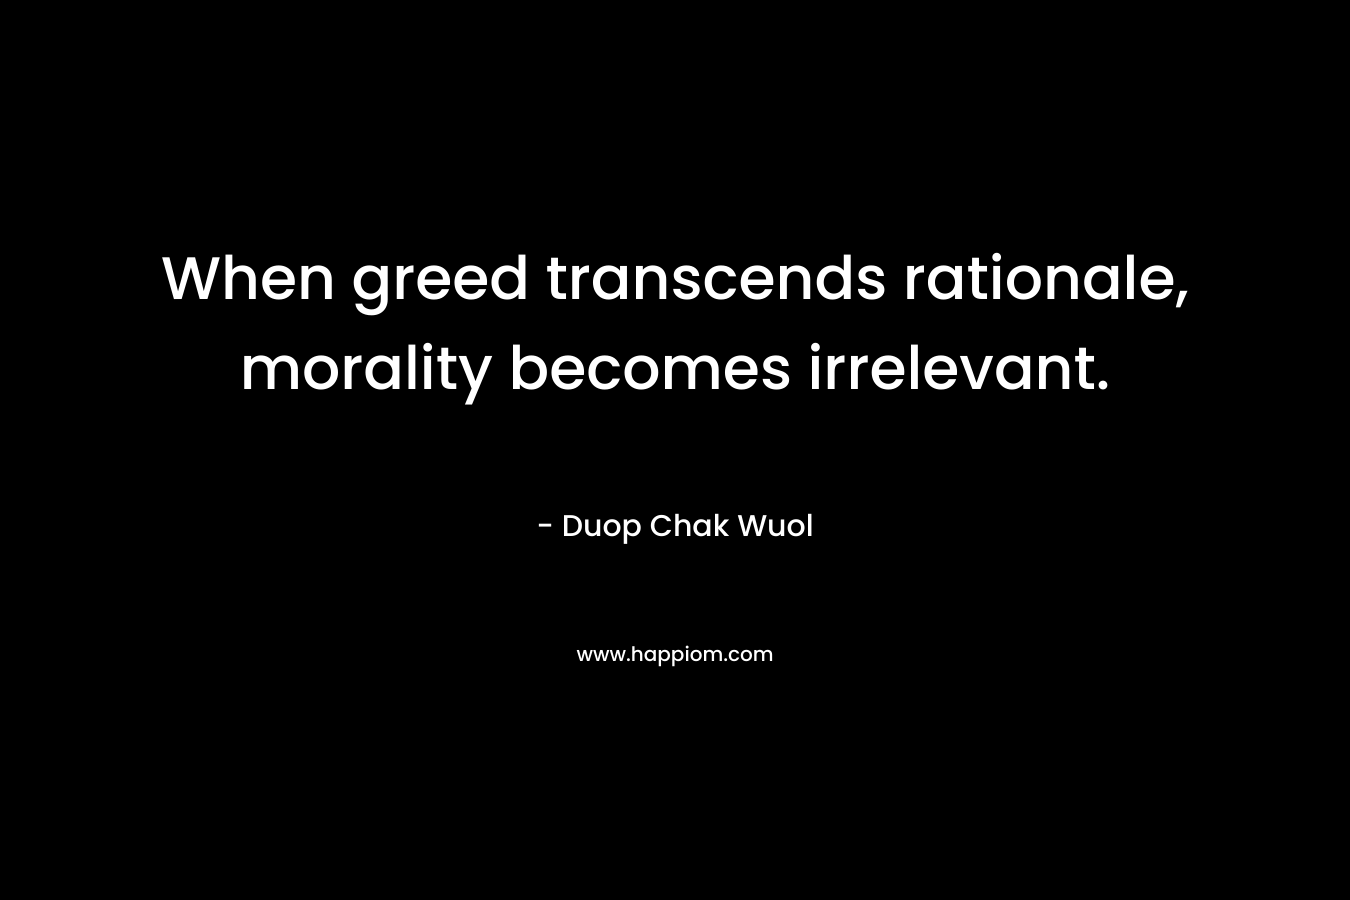 When greed transcends rationale, morality becomes irrelevant.